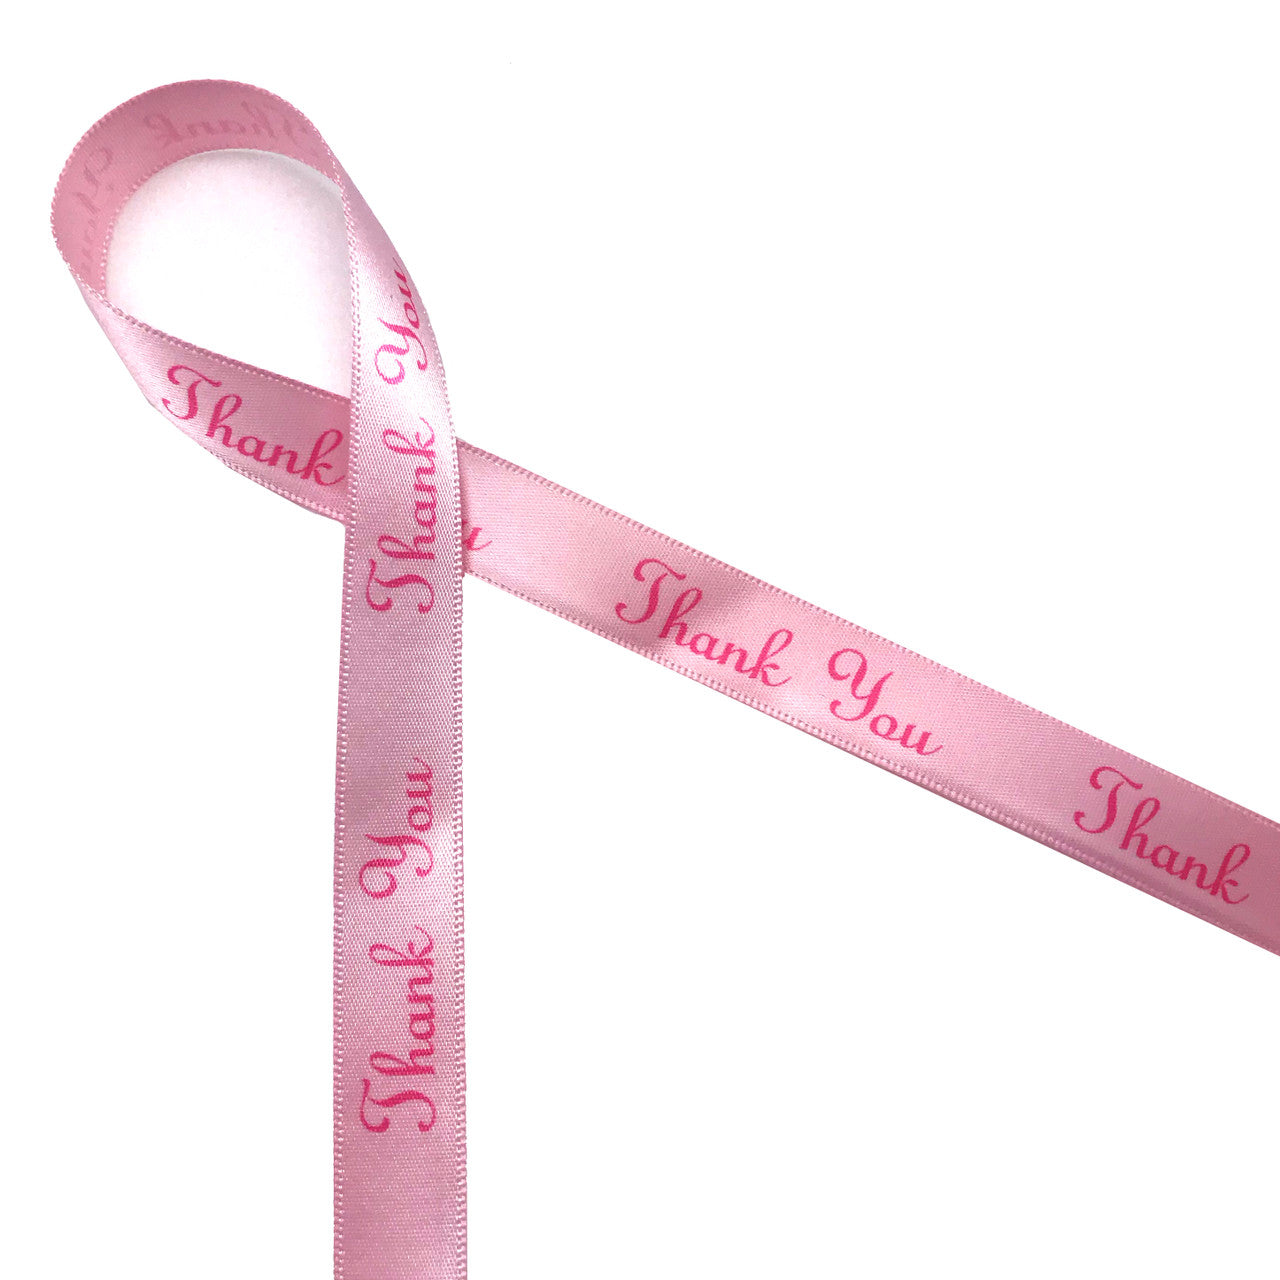 Thank You in Deep Pink on 5/8Lt. Pink Single Face Satin Ribbon, 10 Yards